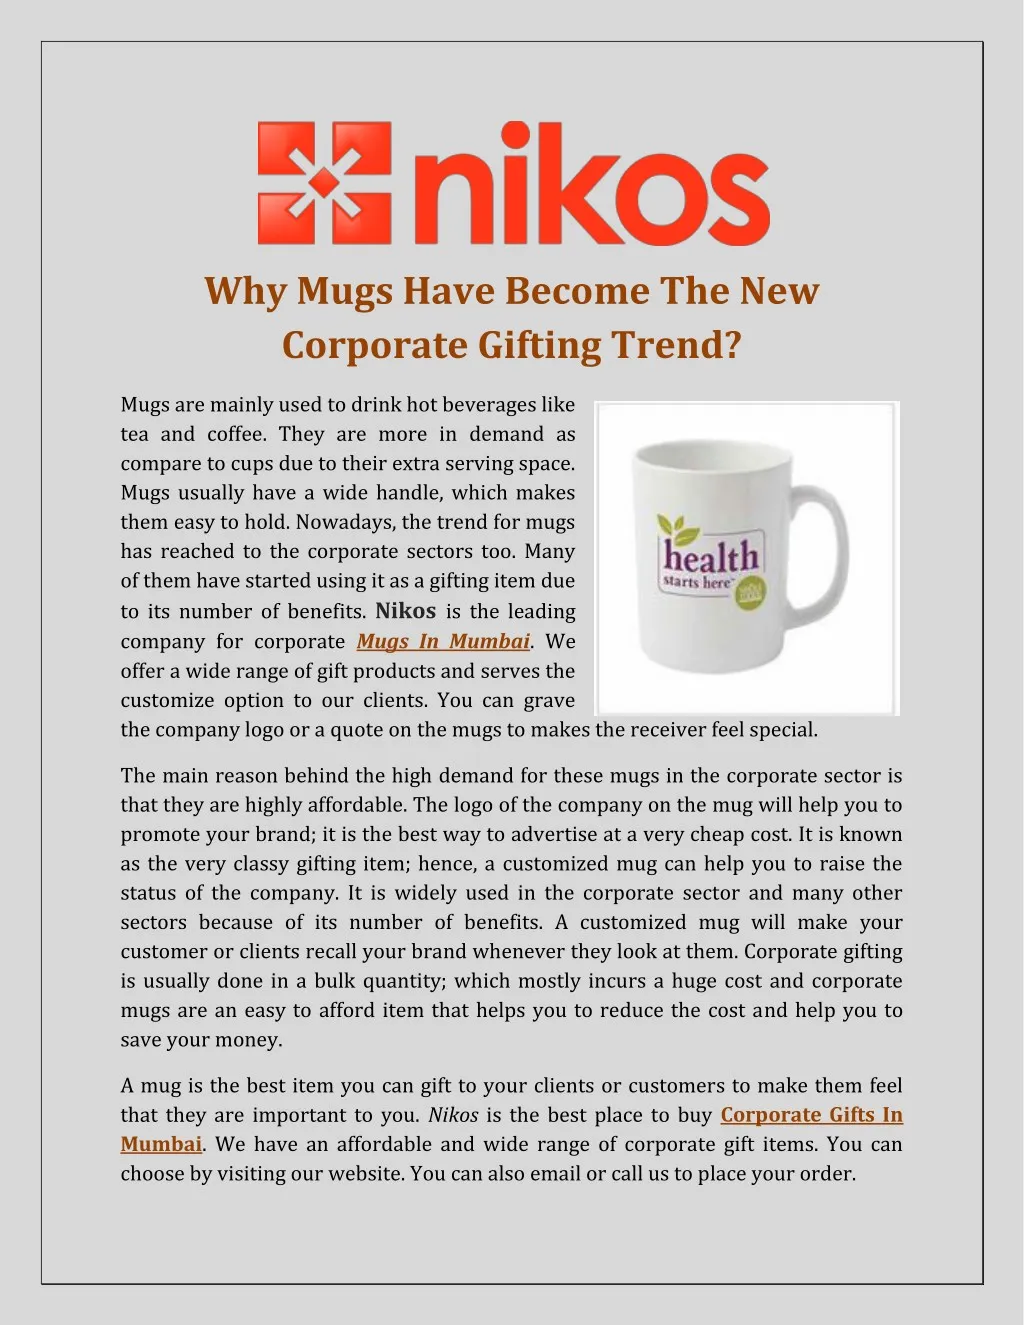 why mugs have become the new corporate gifting